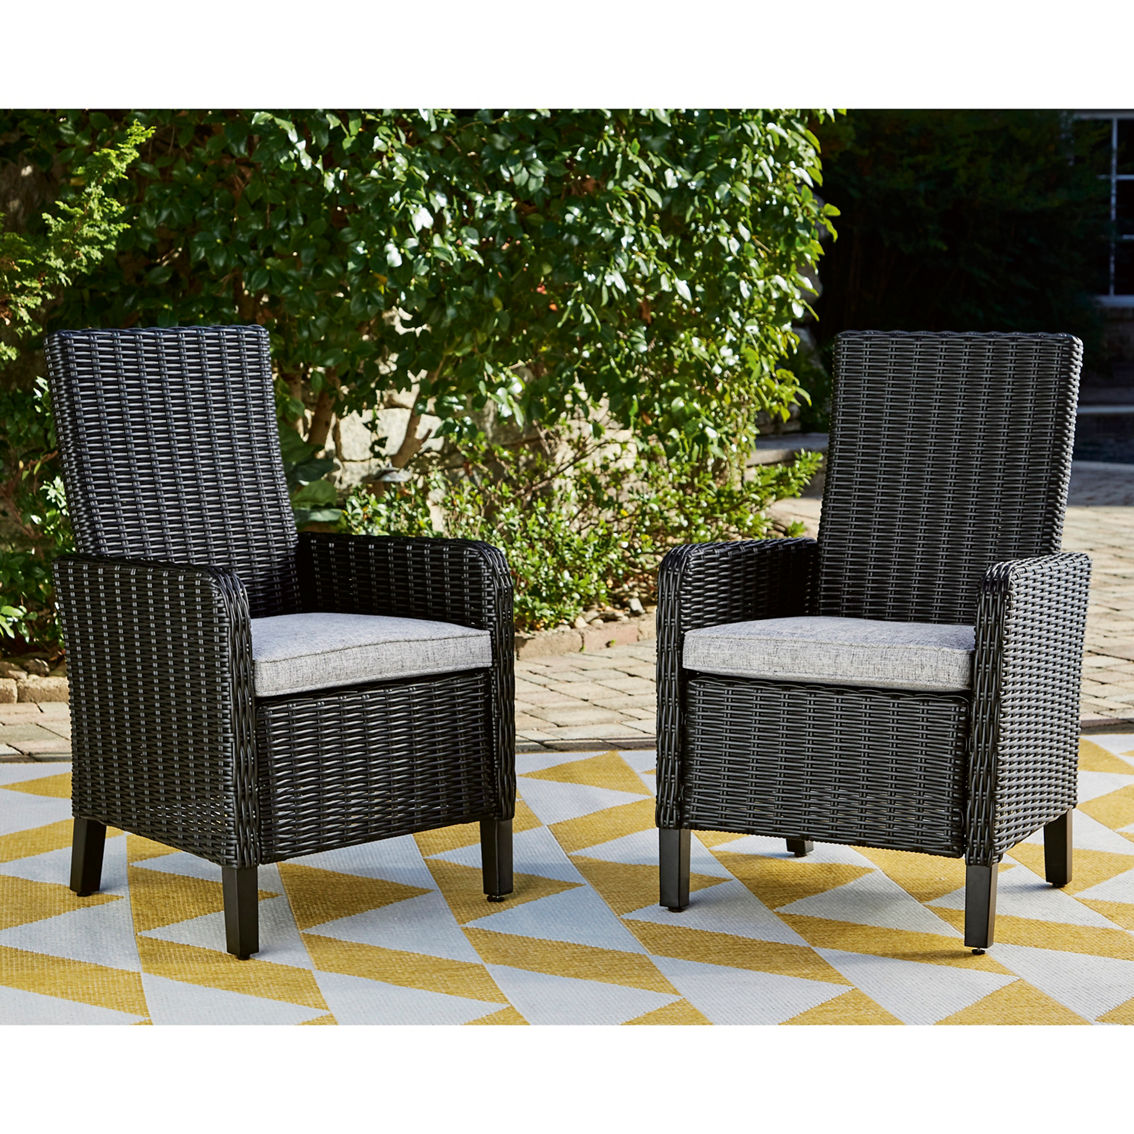 Signature Design by Ashley Beachcroft 6 pc. Outdoor Dining Set with Bench - Image 4 of 7